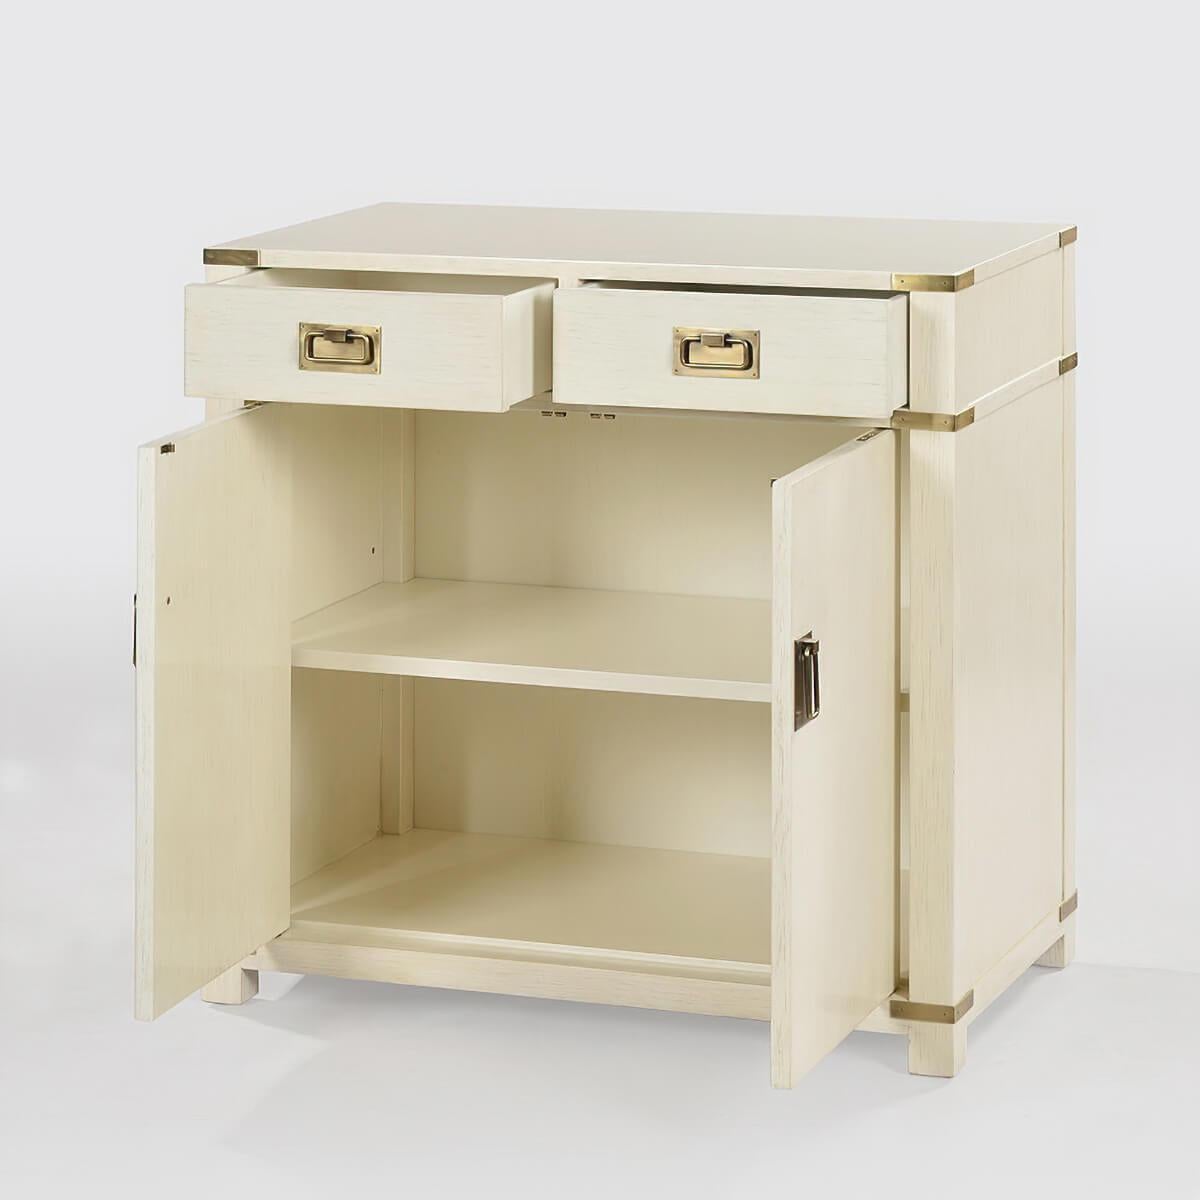 Campaign style cabinet with two drawers, two doors, and hand-cast polished brass hardware has a “drift” white painted finish with subtle grey distressing and hand-rubbed finish.

Dimensions: 32